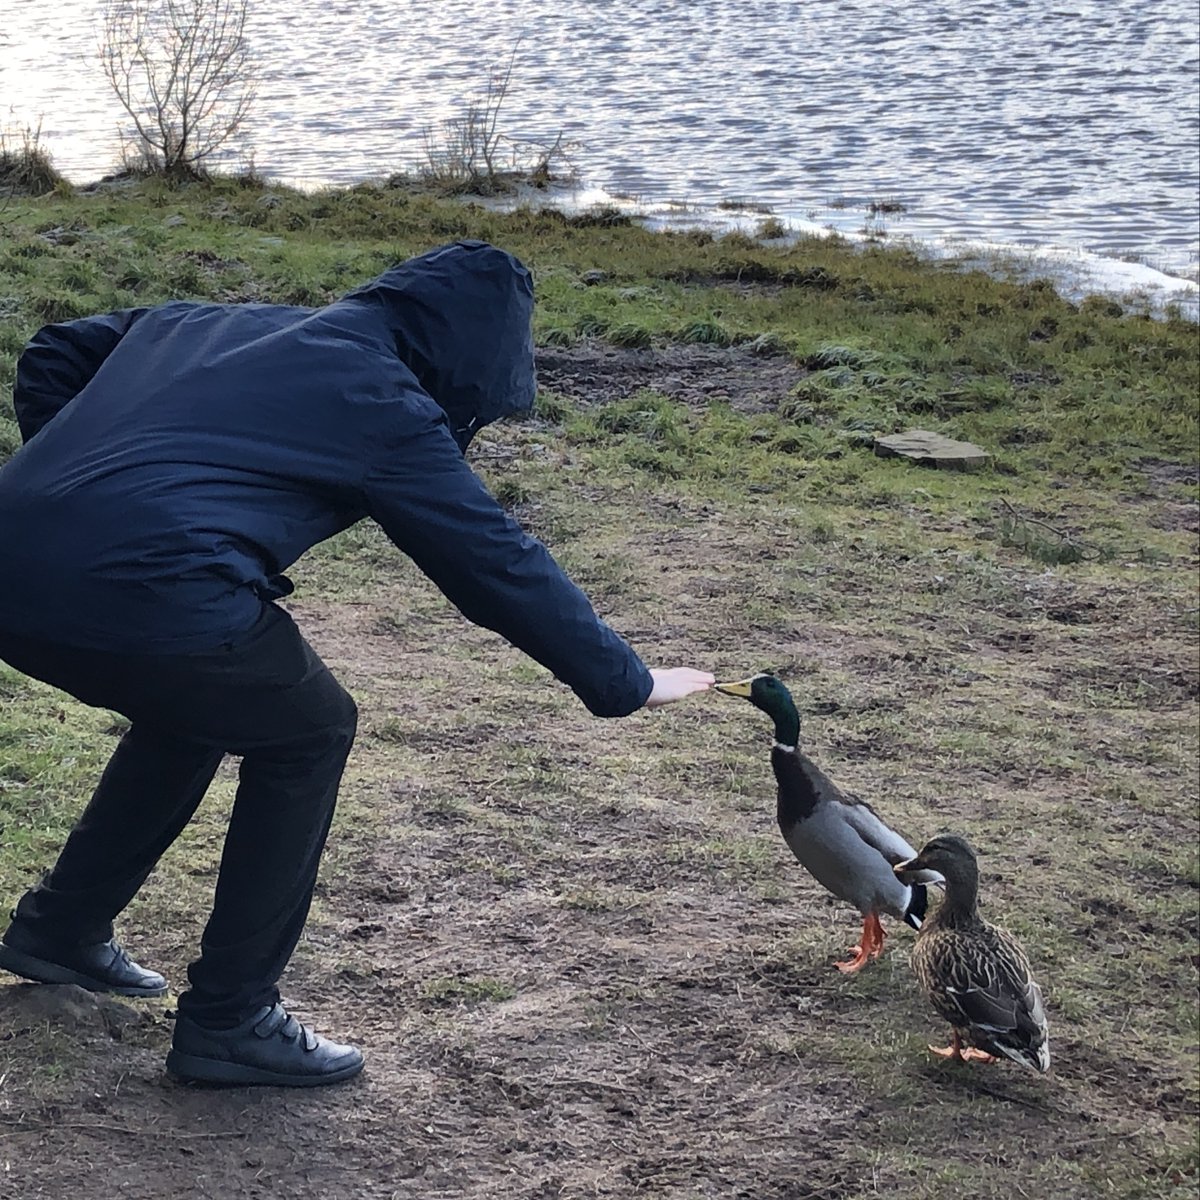 During IDL today, learners completing their Duke of Edinburgh award were out on a trip and visited the ducks. #Outdoorlearning #DofE @DofEScotland